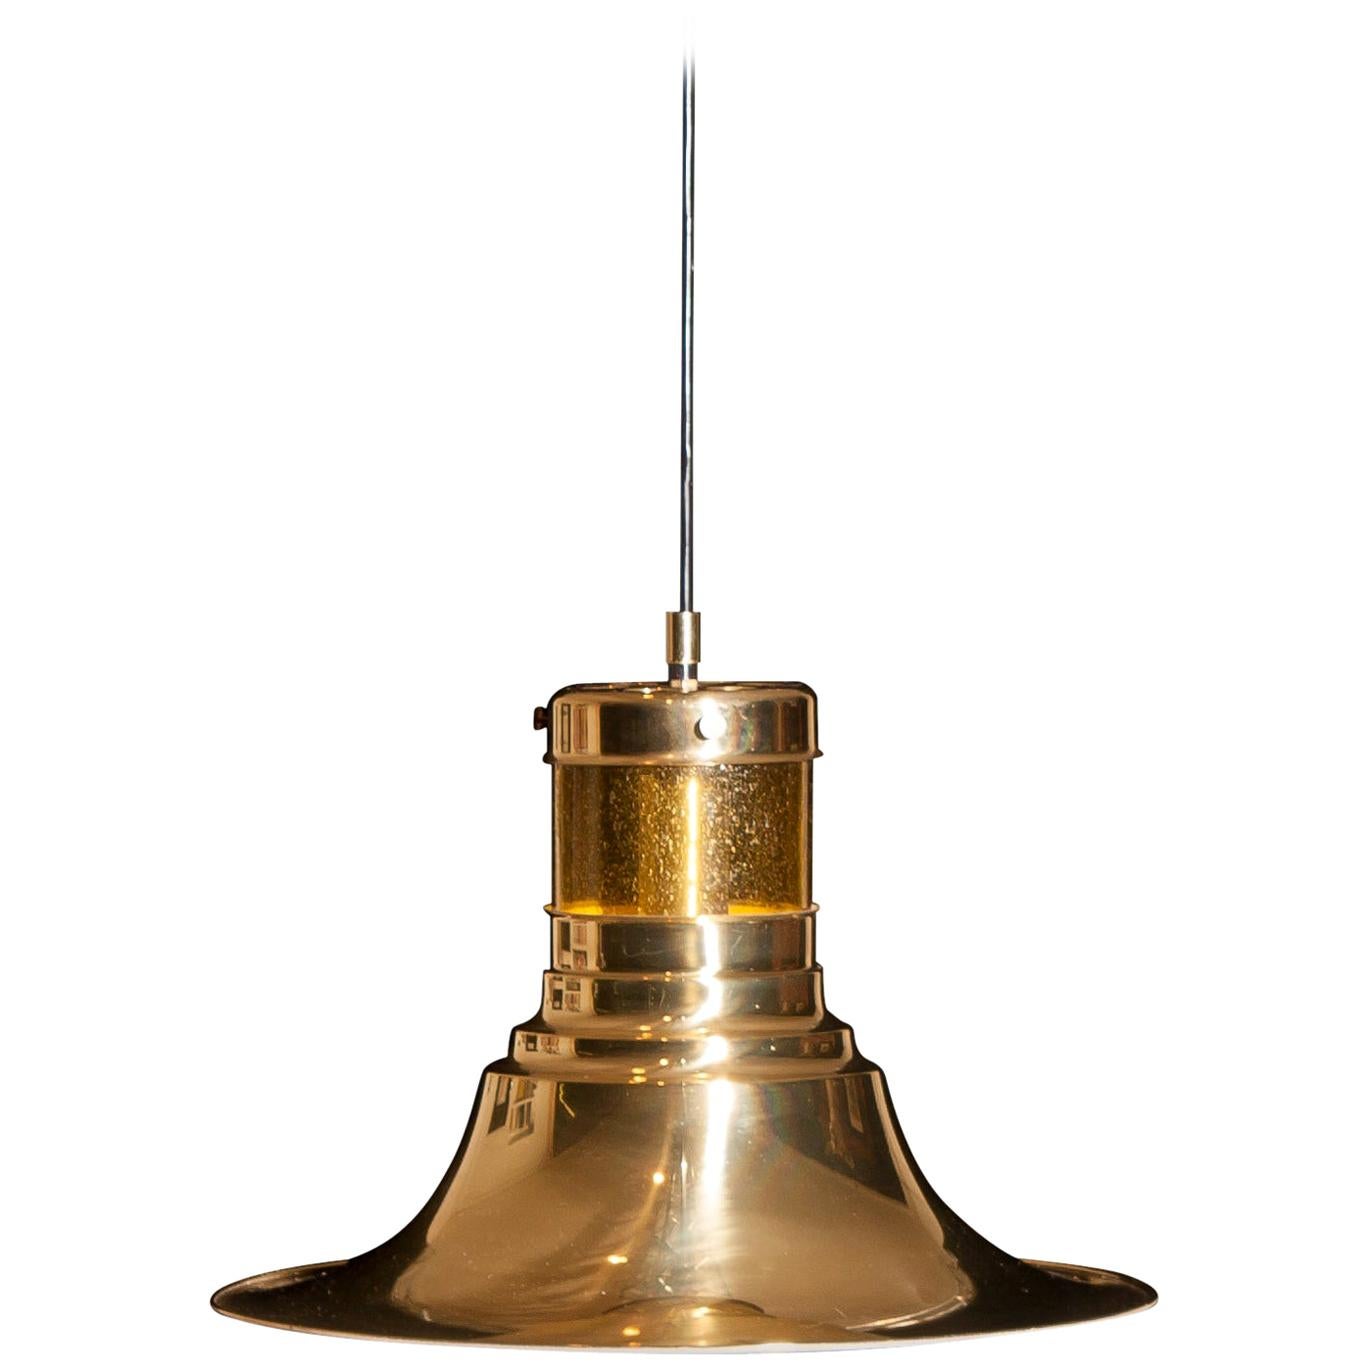 Swedish 1970s, Brass and Glass Pendant Lamp by Börje Claes for Norellet, Sweden